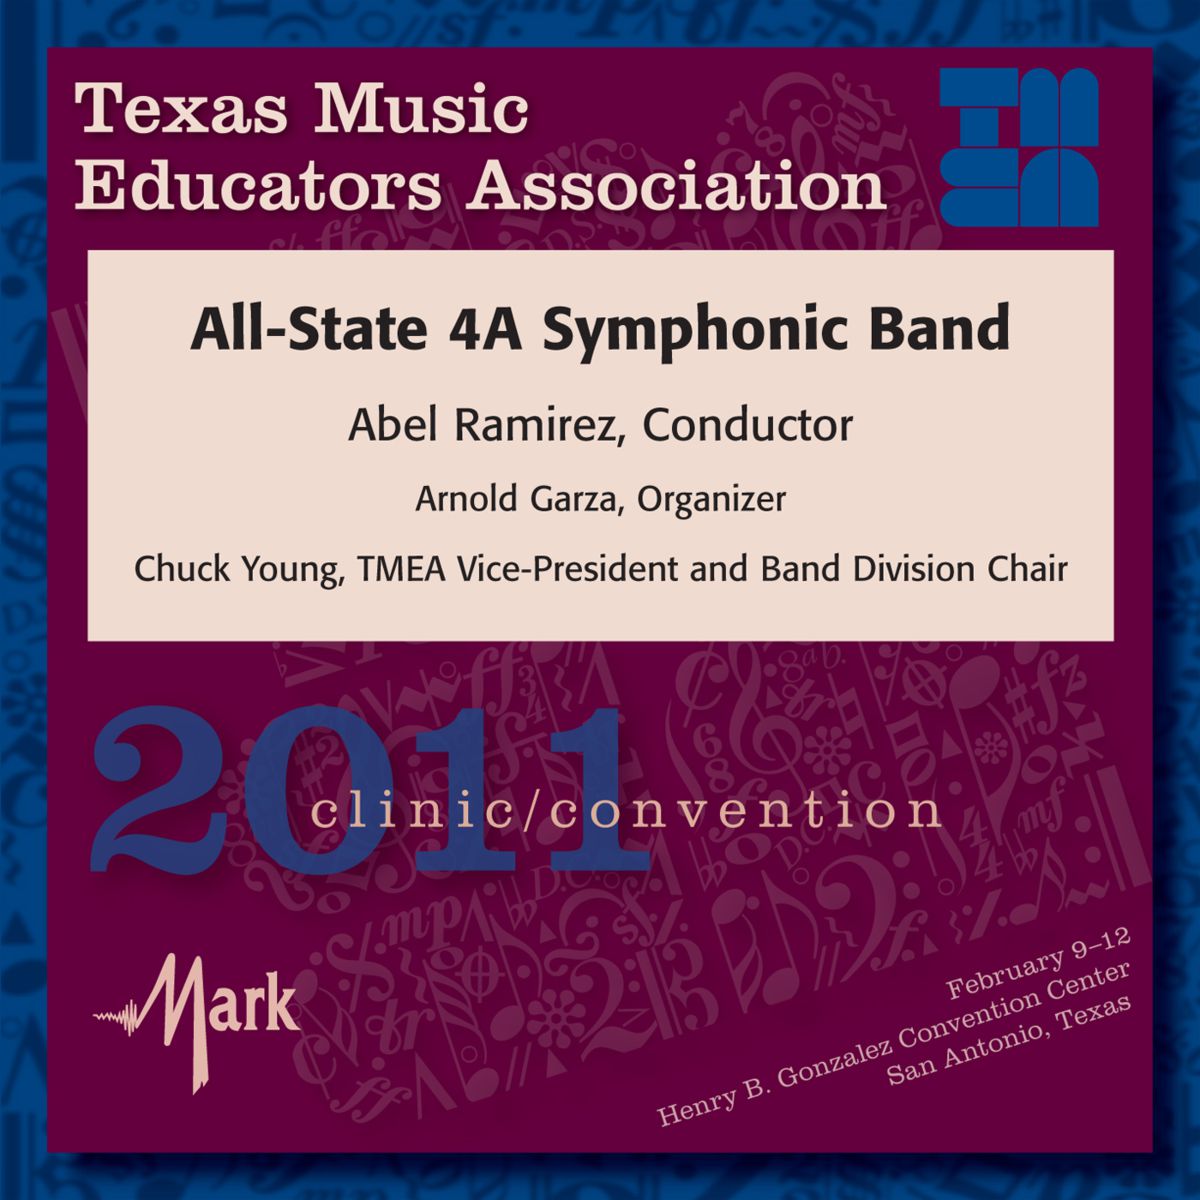 2011 Texas Music Educators Association: All-State 4A Symphonic Band - click here